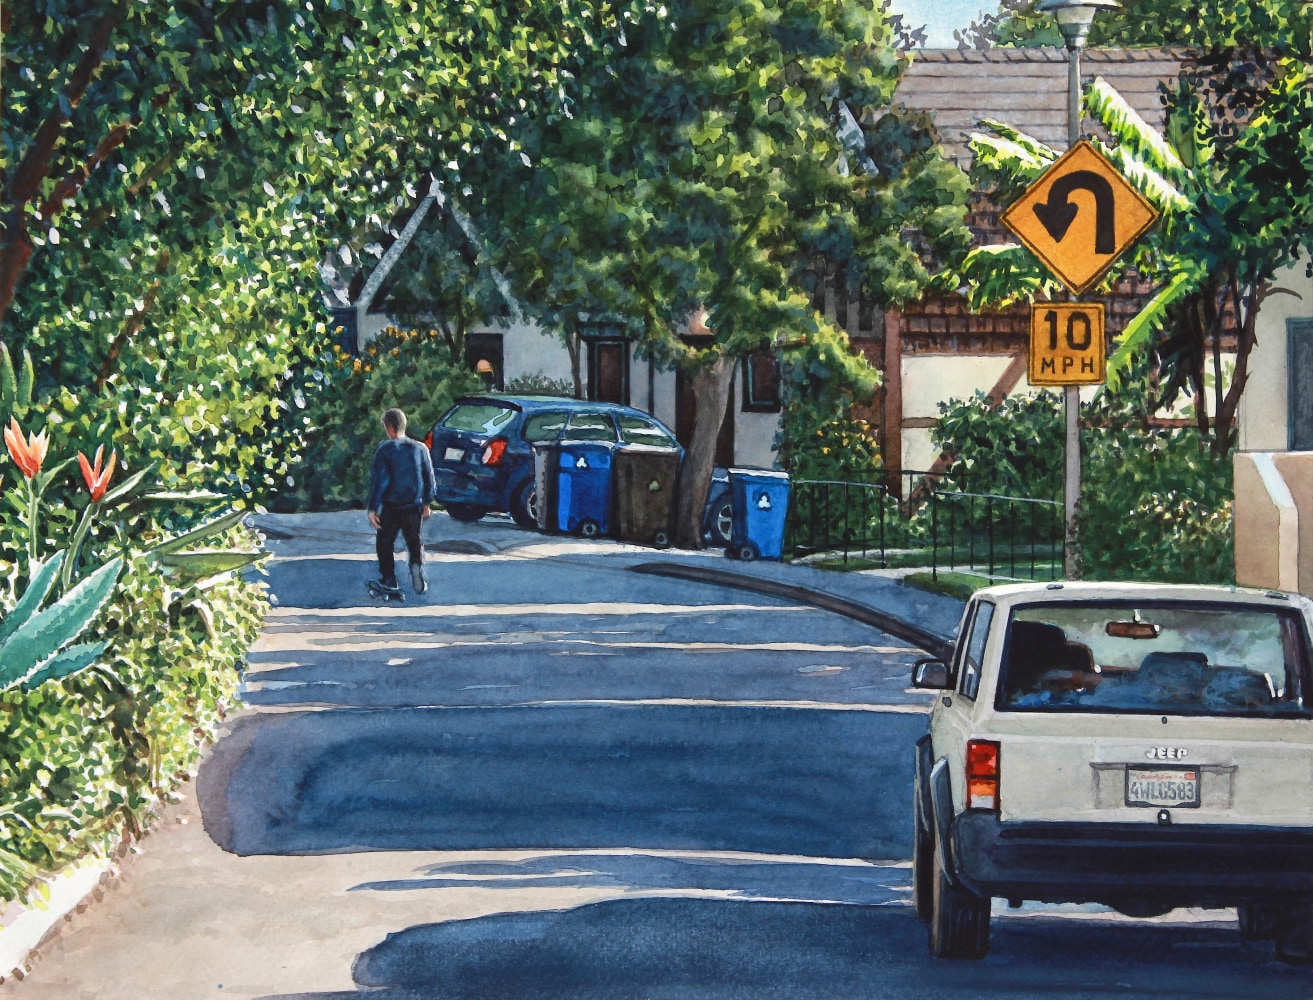 Tim Gardner

Camper on a Country Road with Mt. Cheam

2021

Watercolor on paper

11 3/8 x 12 3/8 inches (28.9 x 31.4 cm)

TG 622